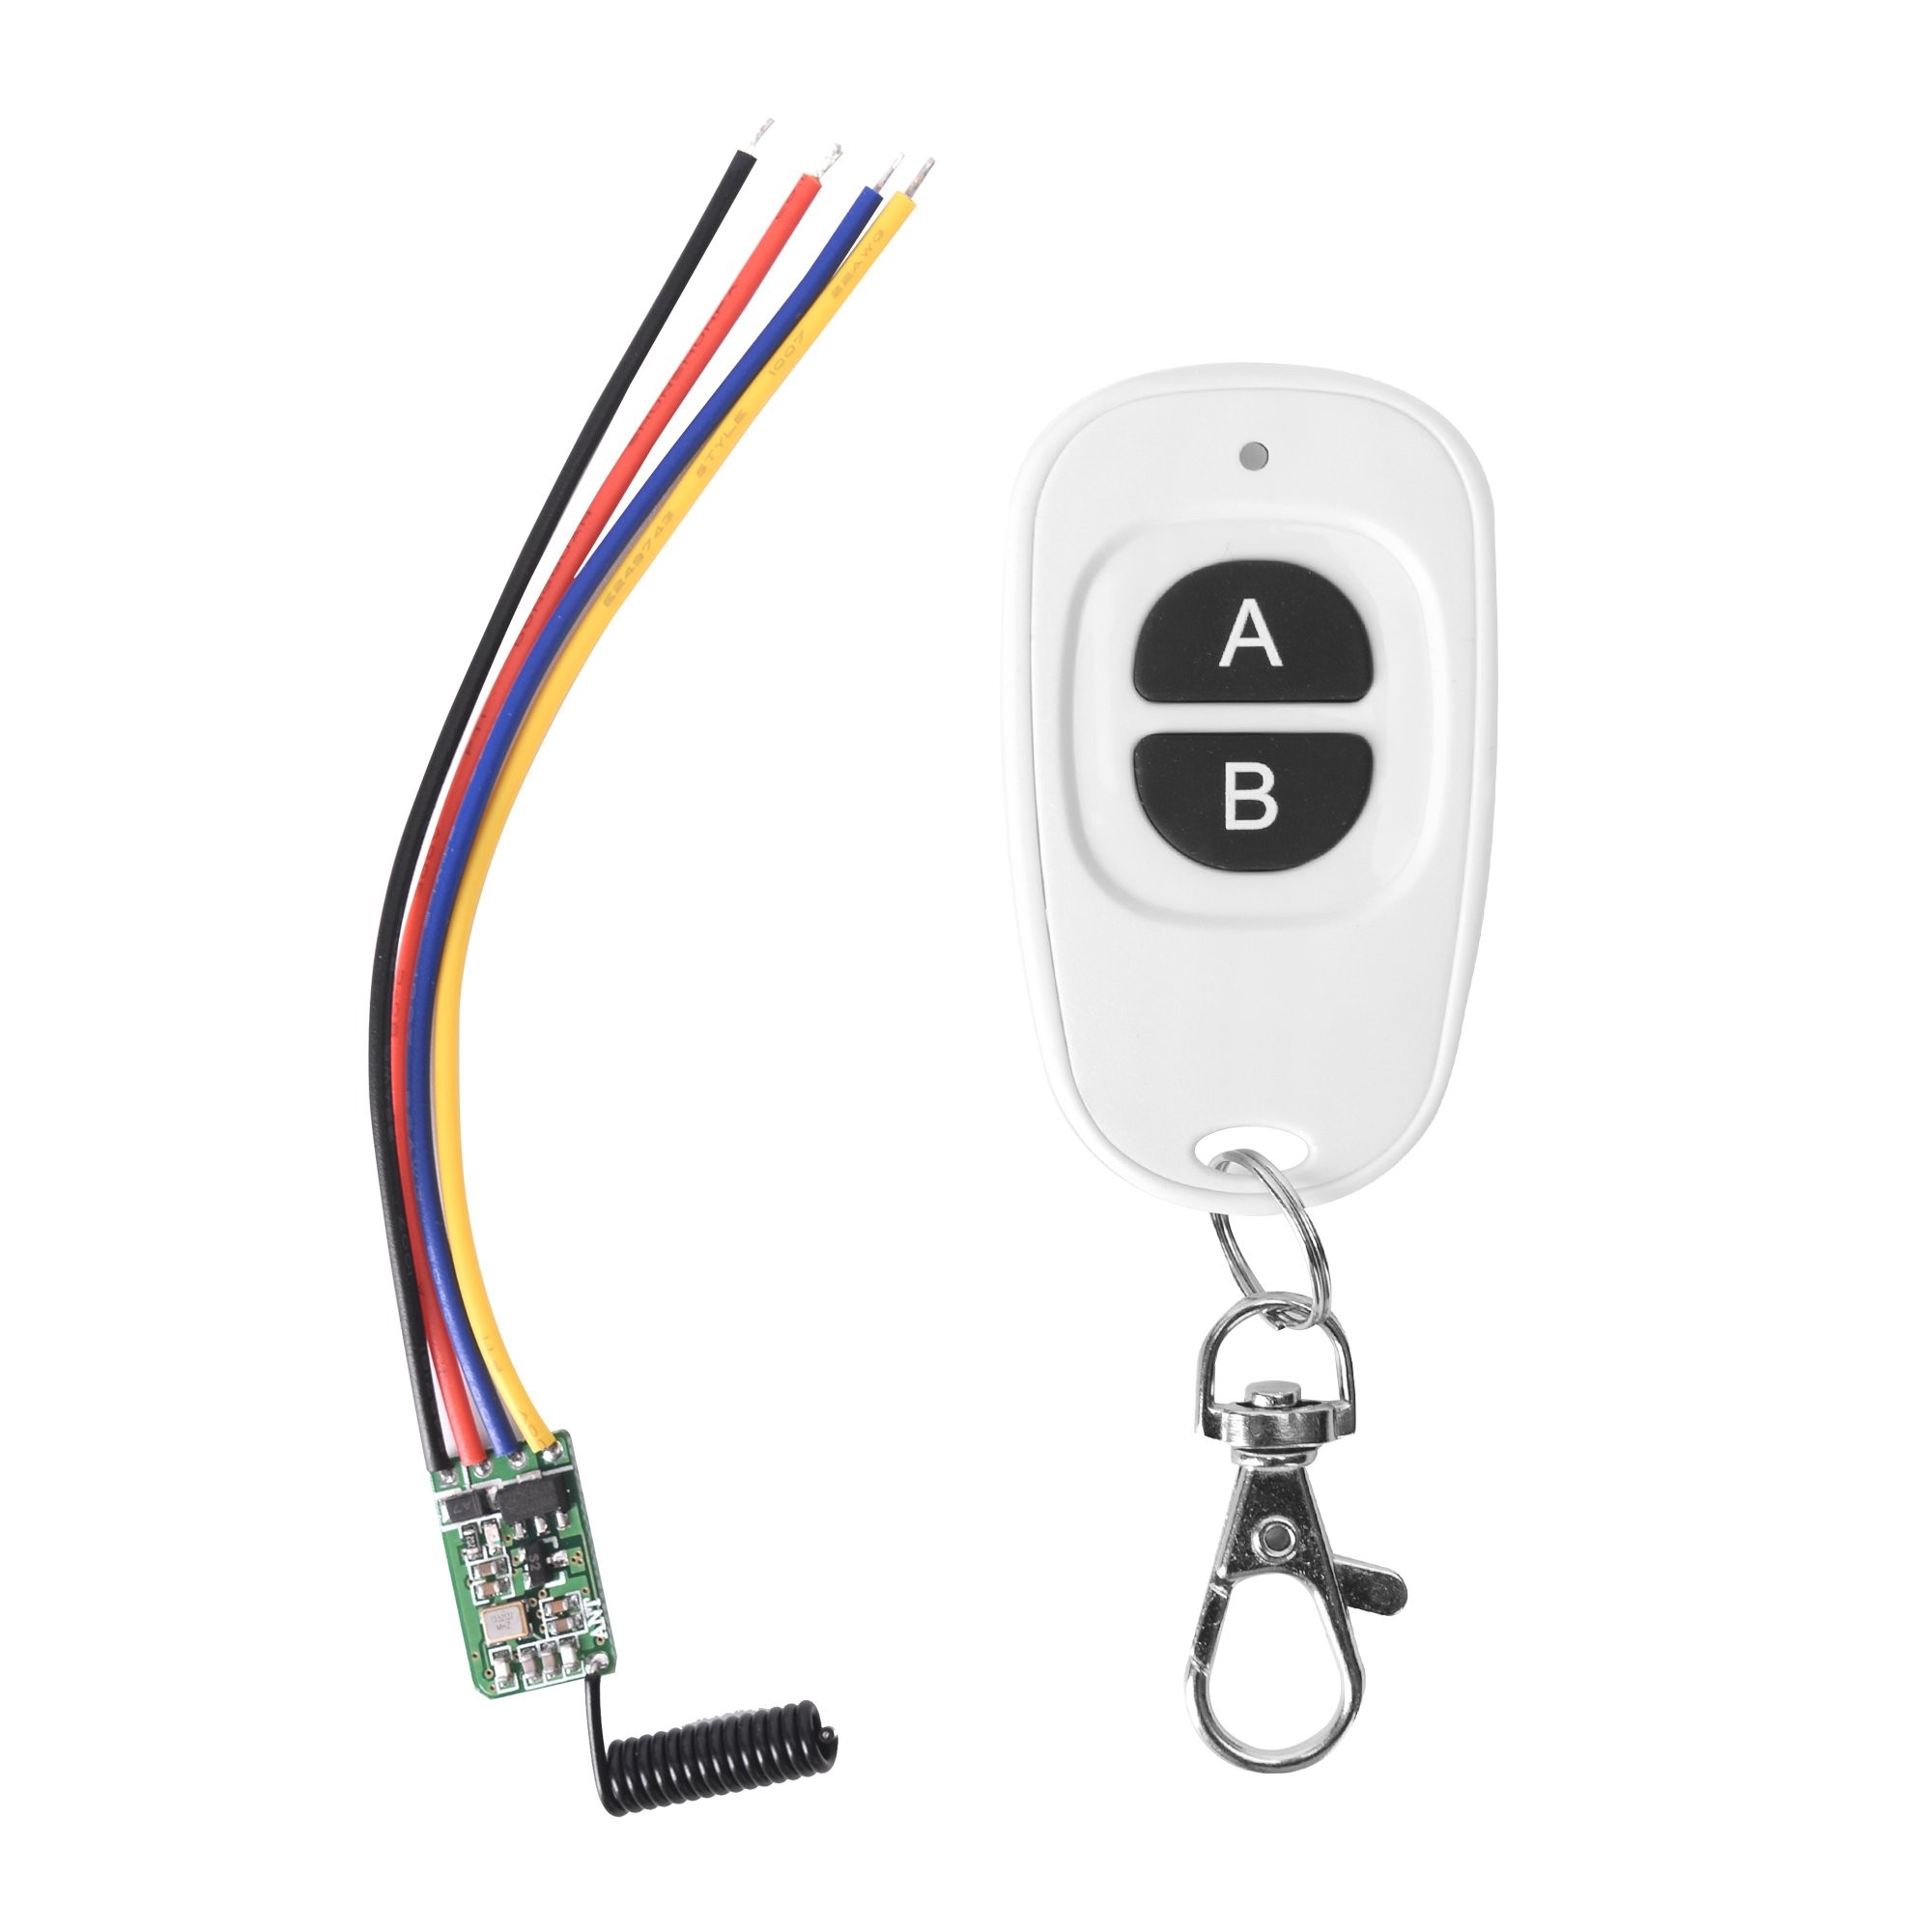 Wireless toy Car Circuit Diagram A Mini Controller for A Light Low Voltage Load Handles Up to 1a Of Wireless toy Car Circuit Diagram